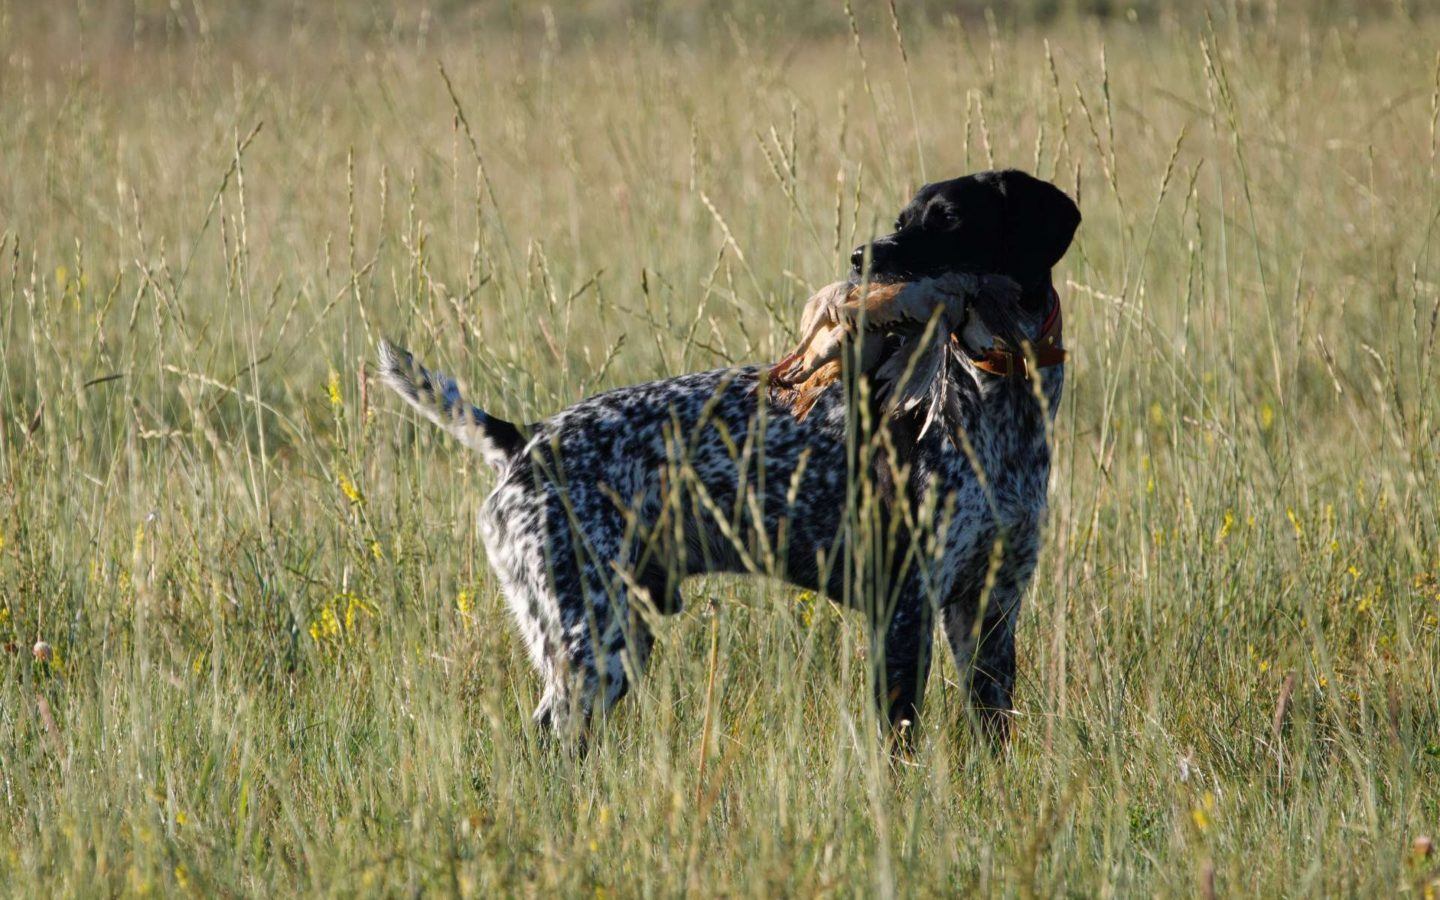 a dog standing in a field with a bird in its mouth